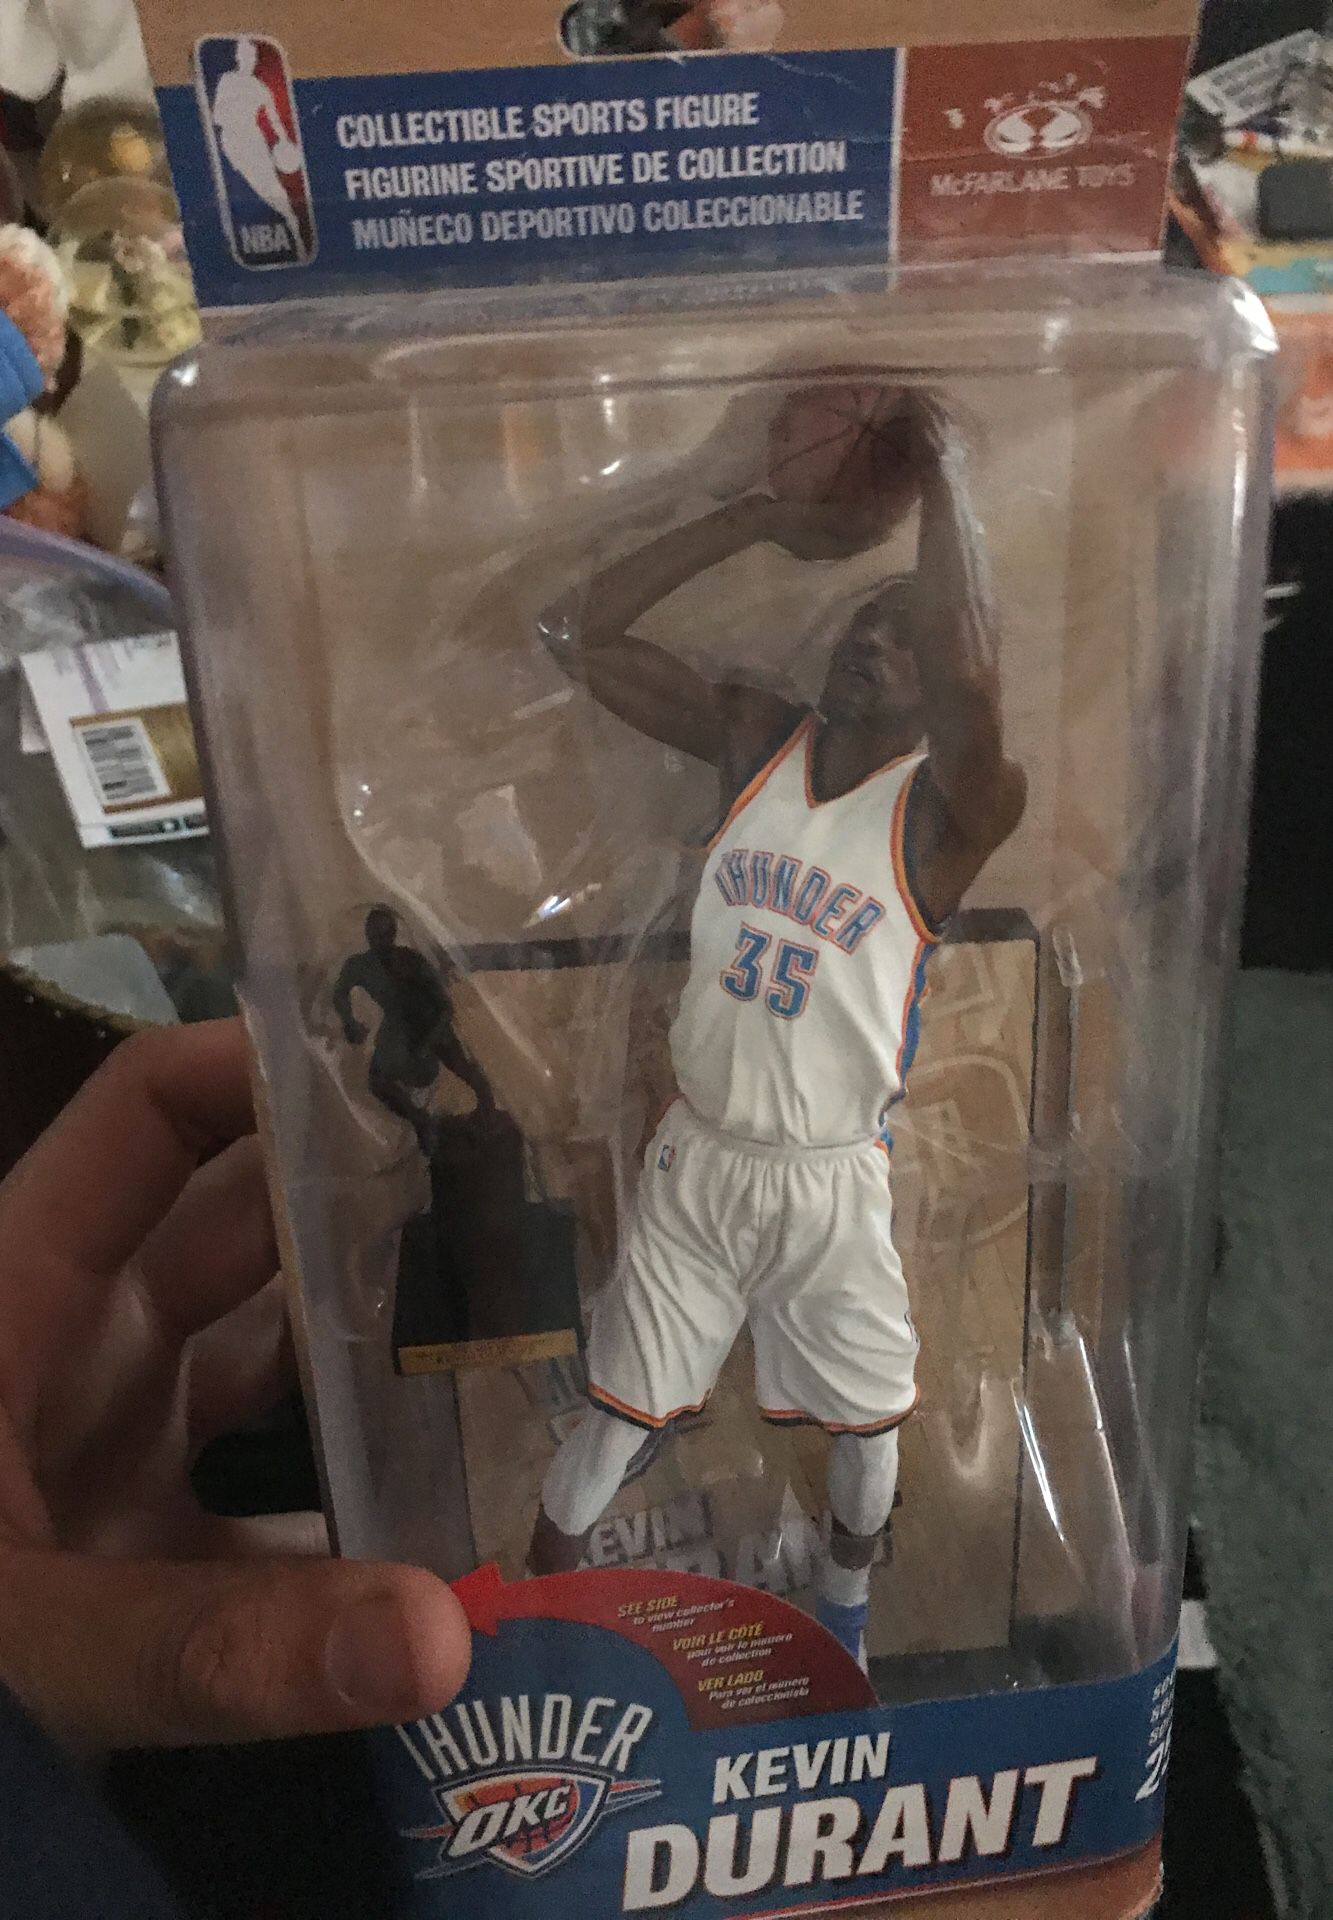 McFarlane toys Kevin Durant Oklahoma thunder series 25 collectors figuring